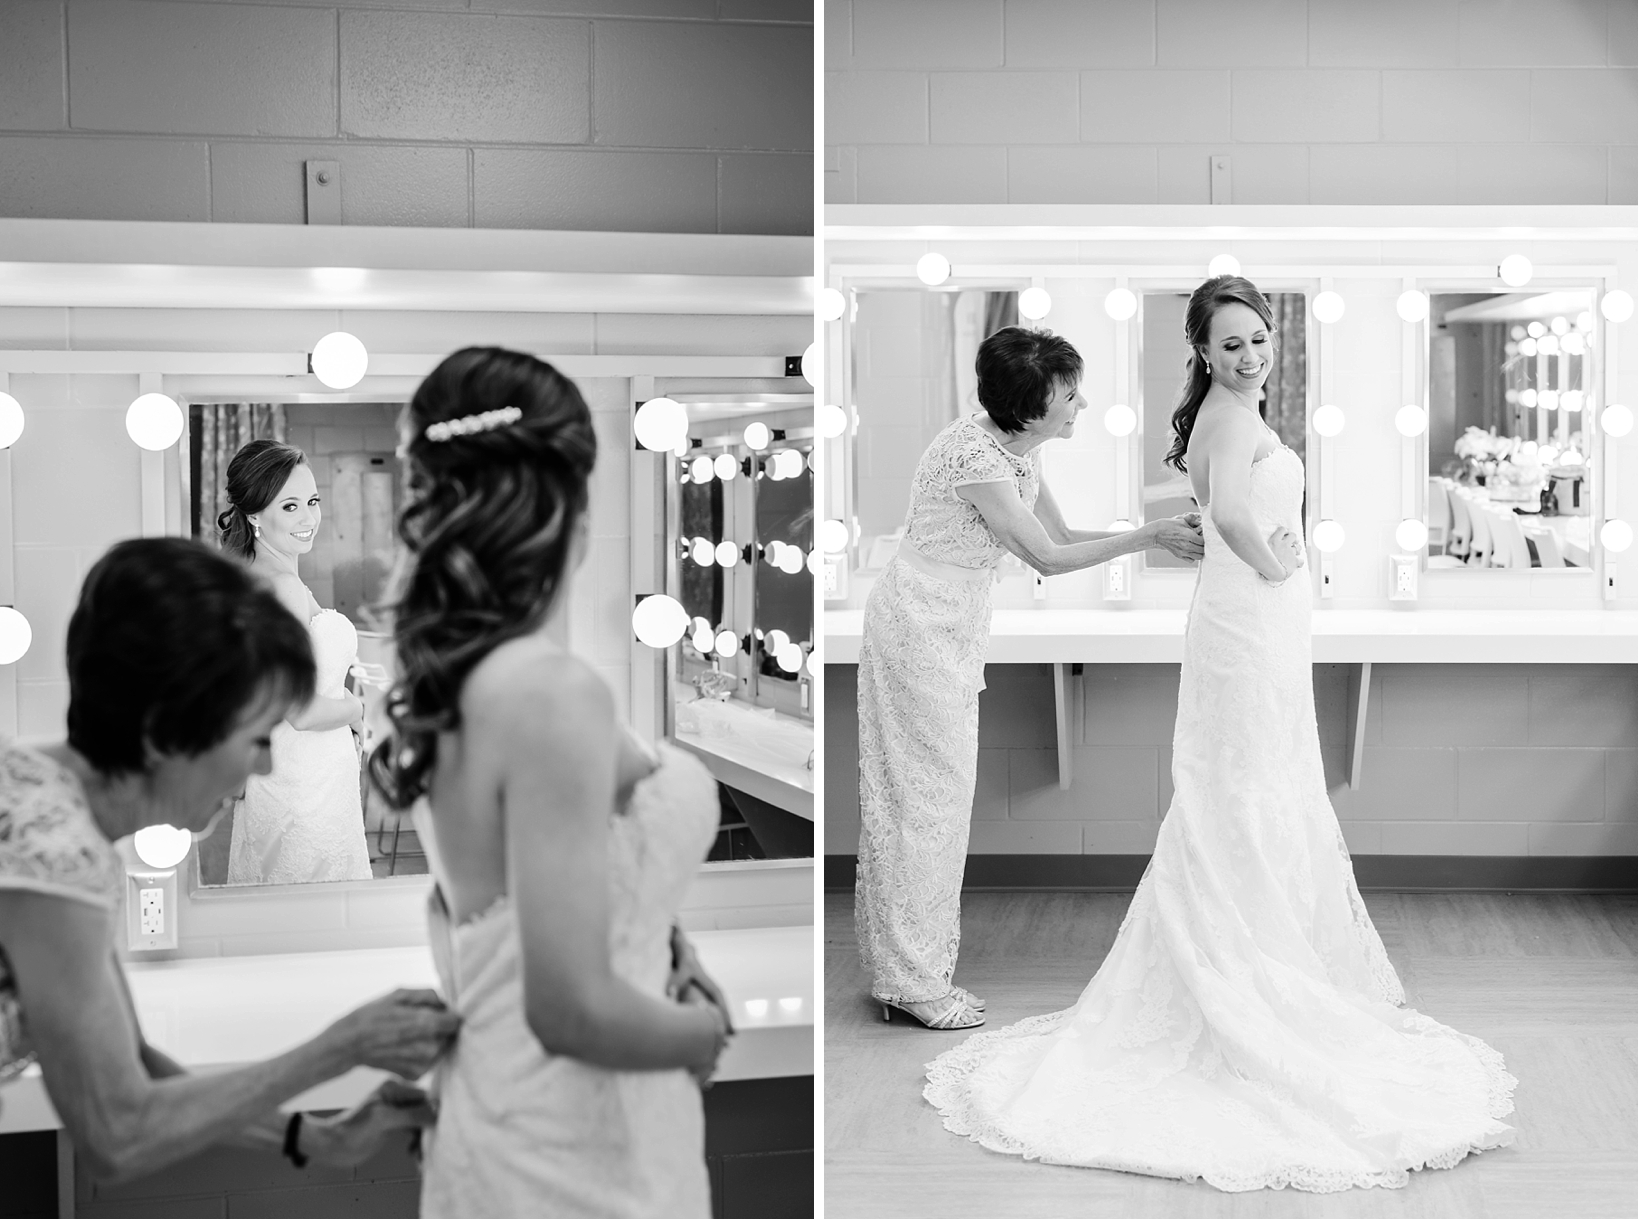 Black and White image of the bride with her mom helping her into her wedding dress by Sarah & Ben Photography